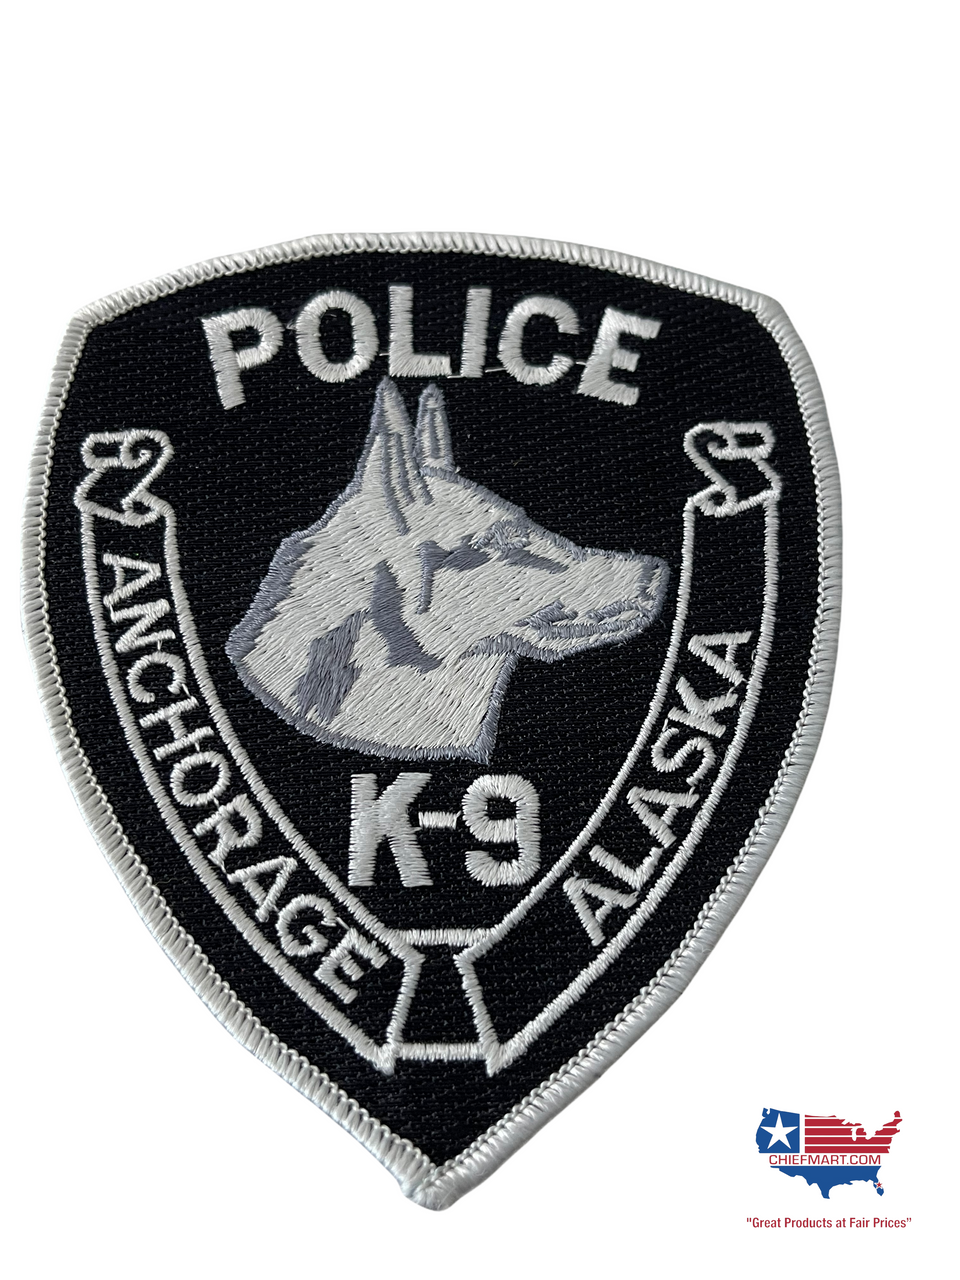 Mission & Patch — Anchorage Police Department